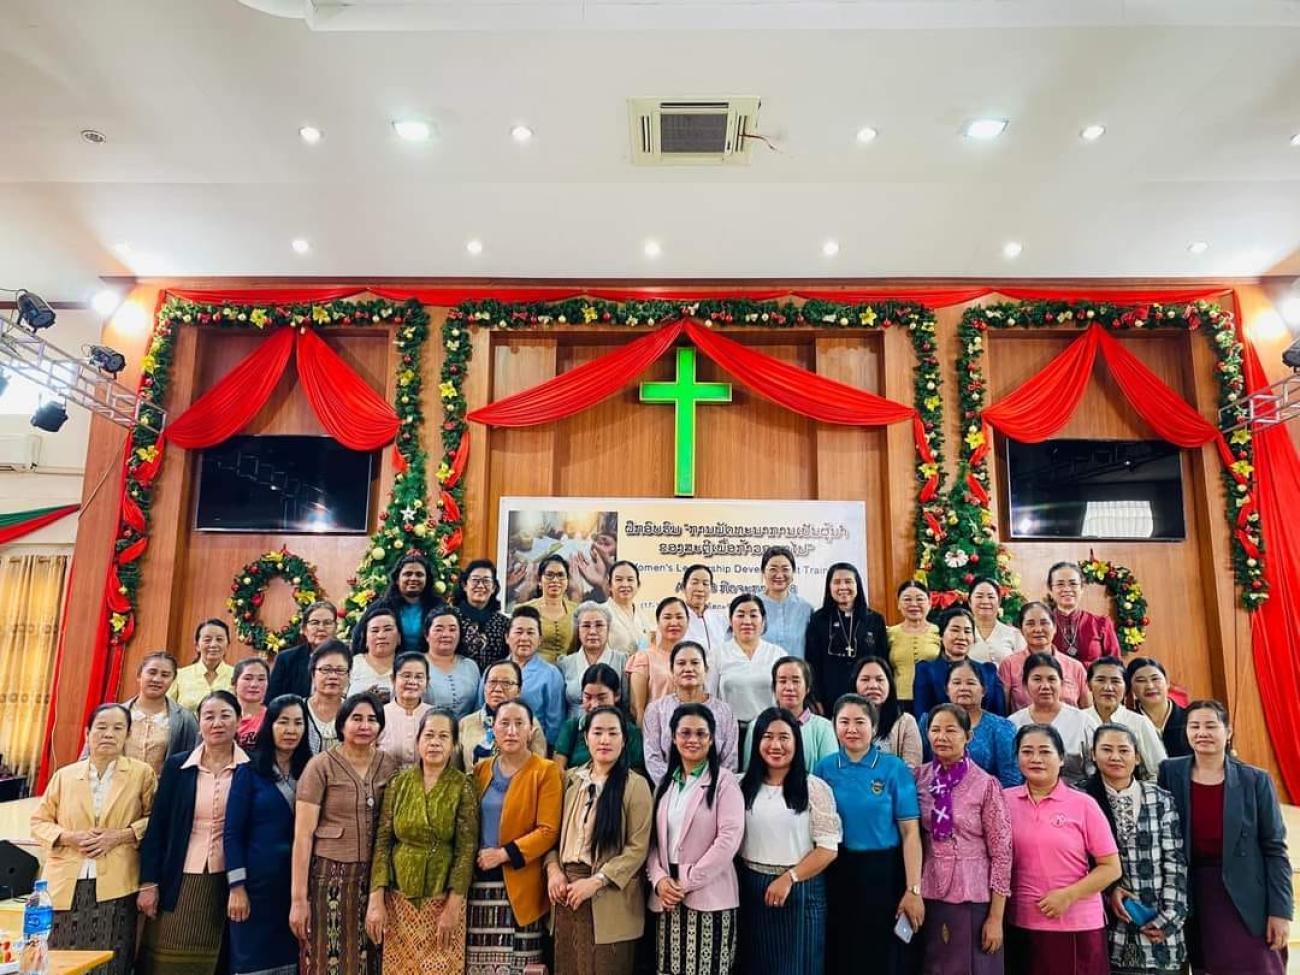 Christian conference of Asia, Asia christanity